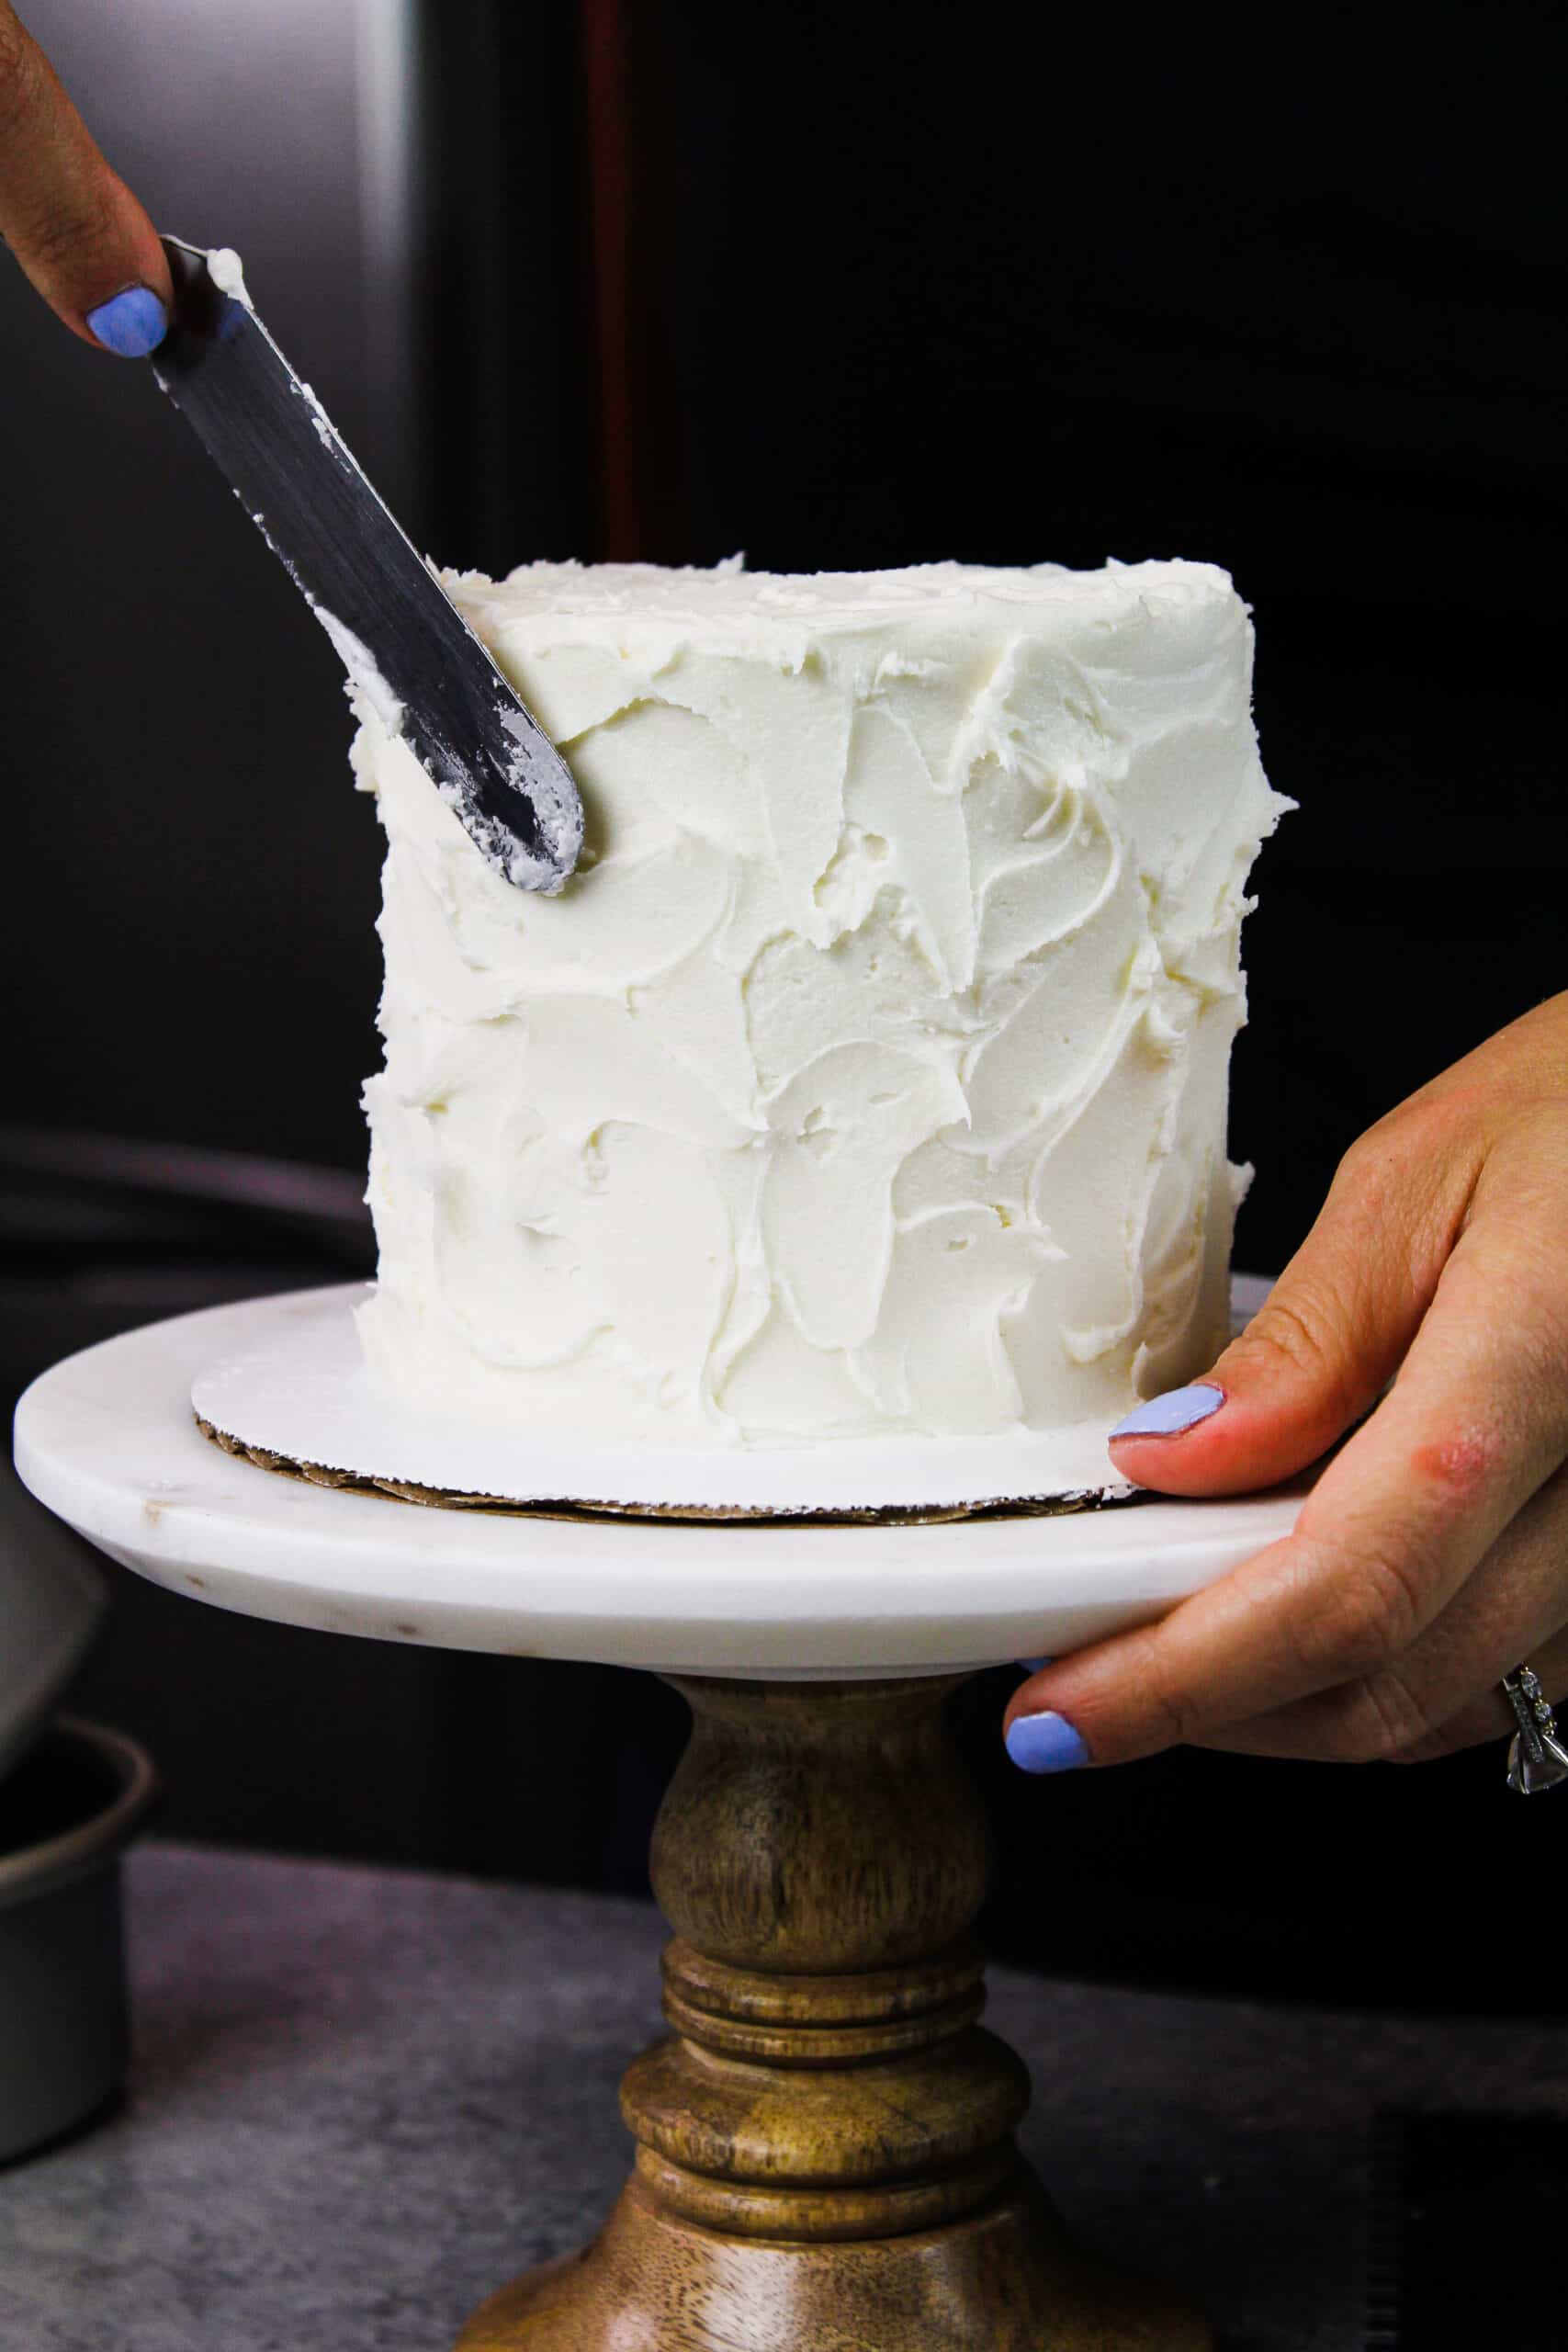 image of ingredients arranged to make a 4-inch vanilla cake